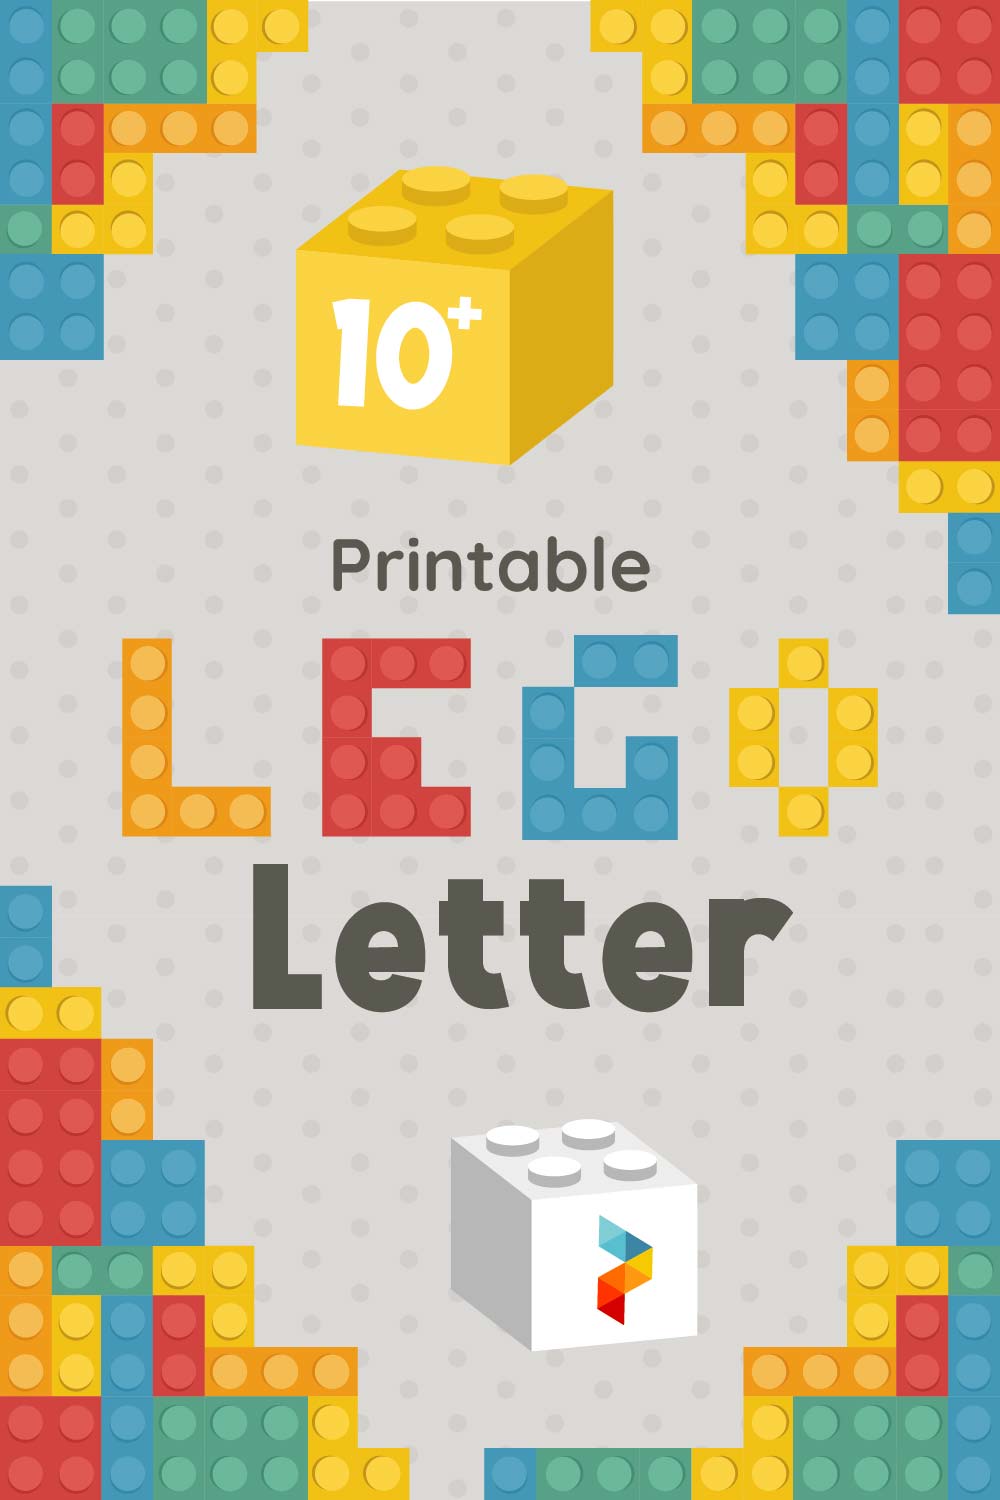 Printable LEGO Letters